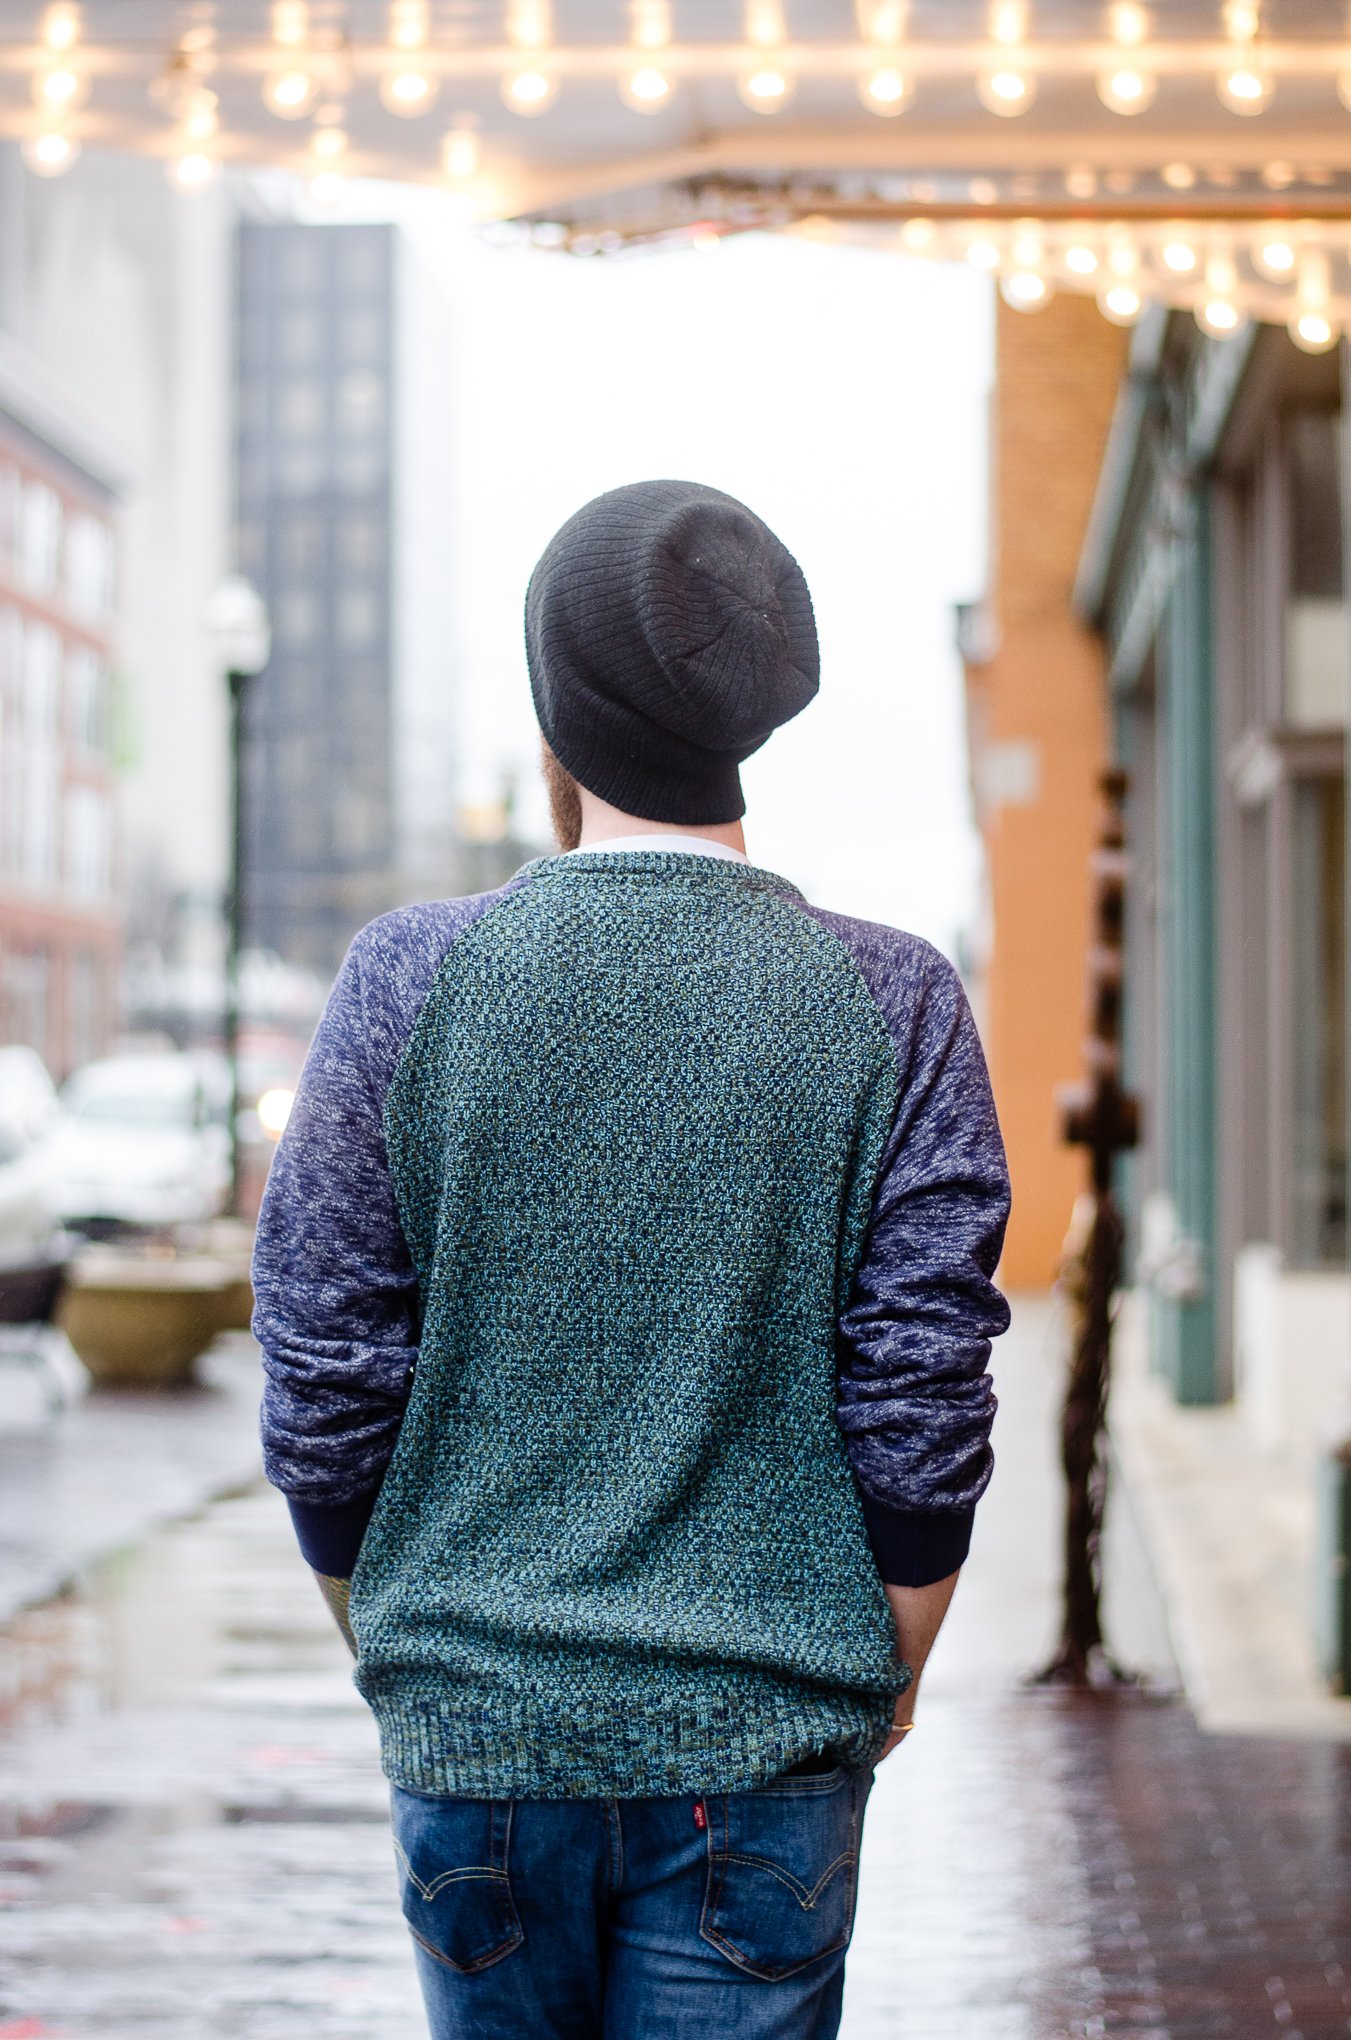 The Kentucky Gent, a men's fashion and lifestyle blogger, shares his growing pains as blogger.